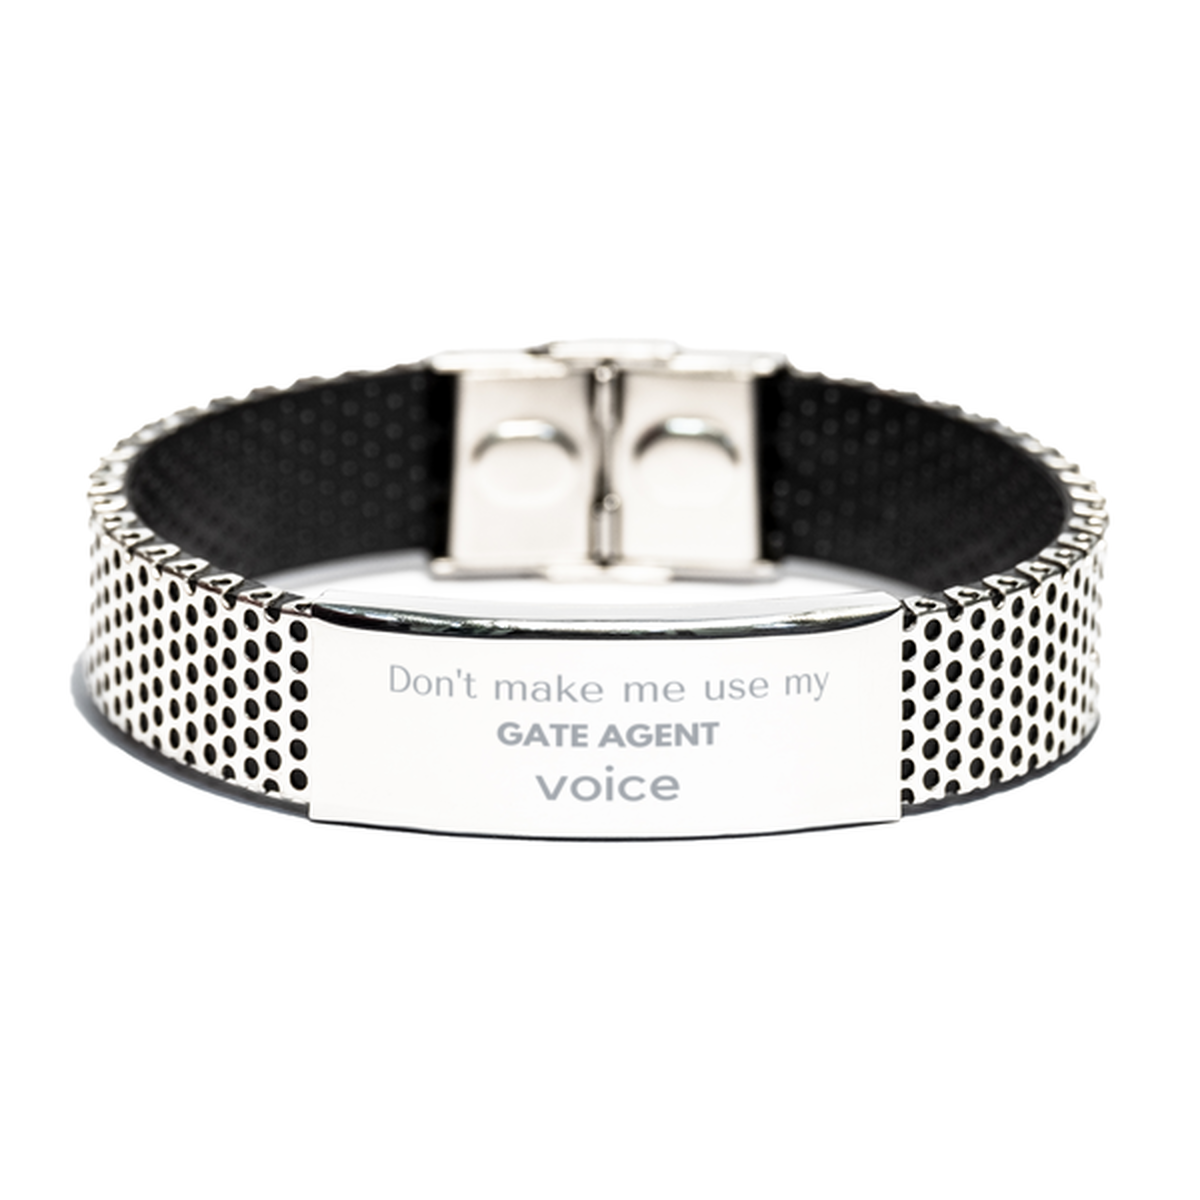 Don't make me use my Gate Agent voice, Sarcasm Gate Agent Gifts, Christmas Gate Agent Stainless Steel Bracelet Birthday Unique Gifts For Gate Agent Coworkers, Men, Women, Colleague, Friends